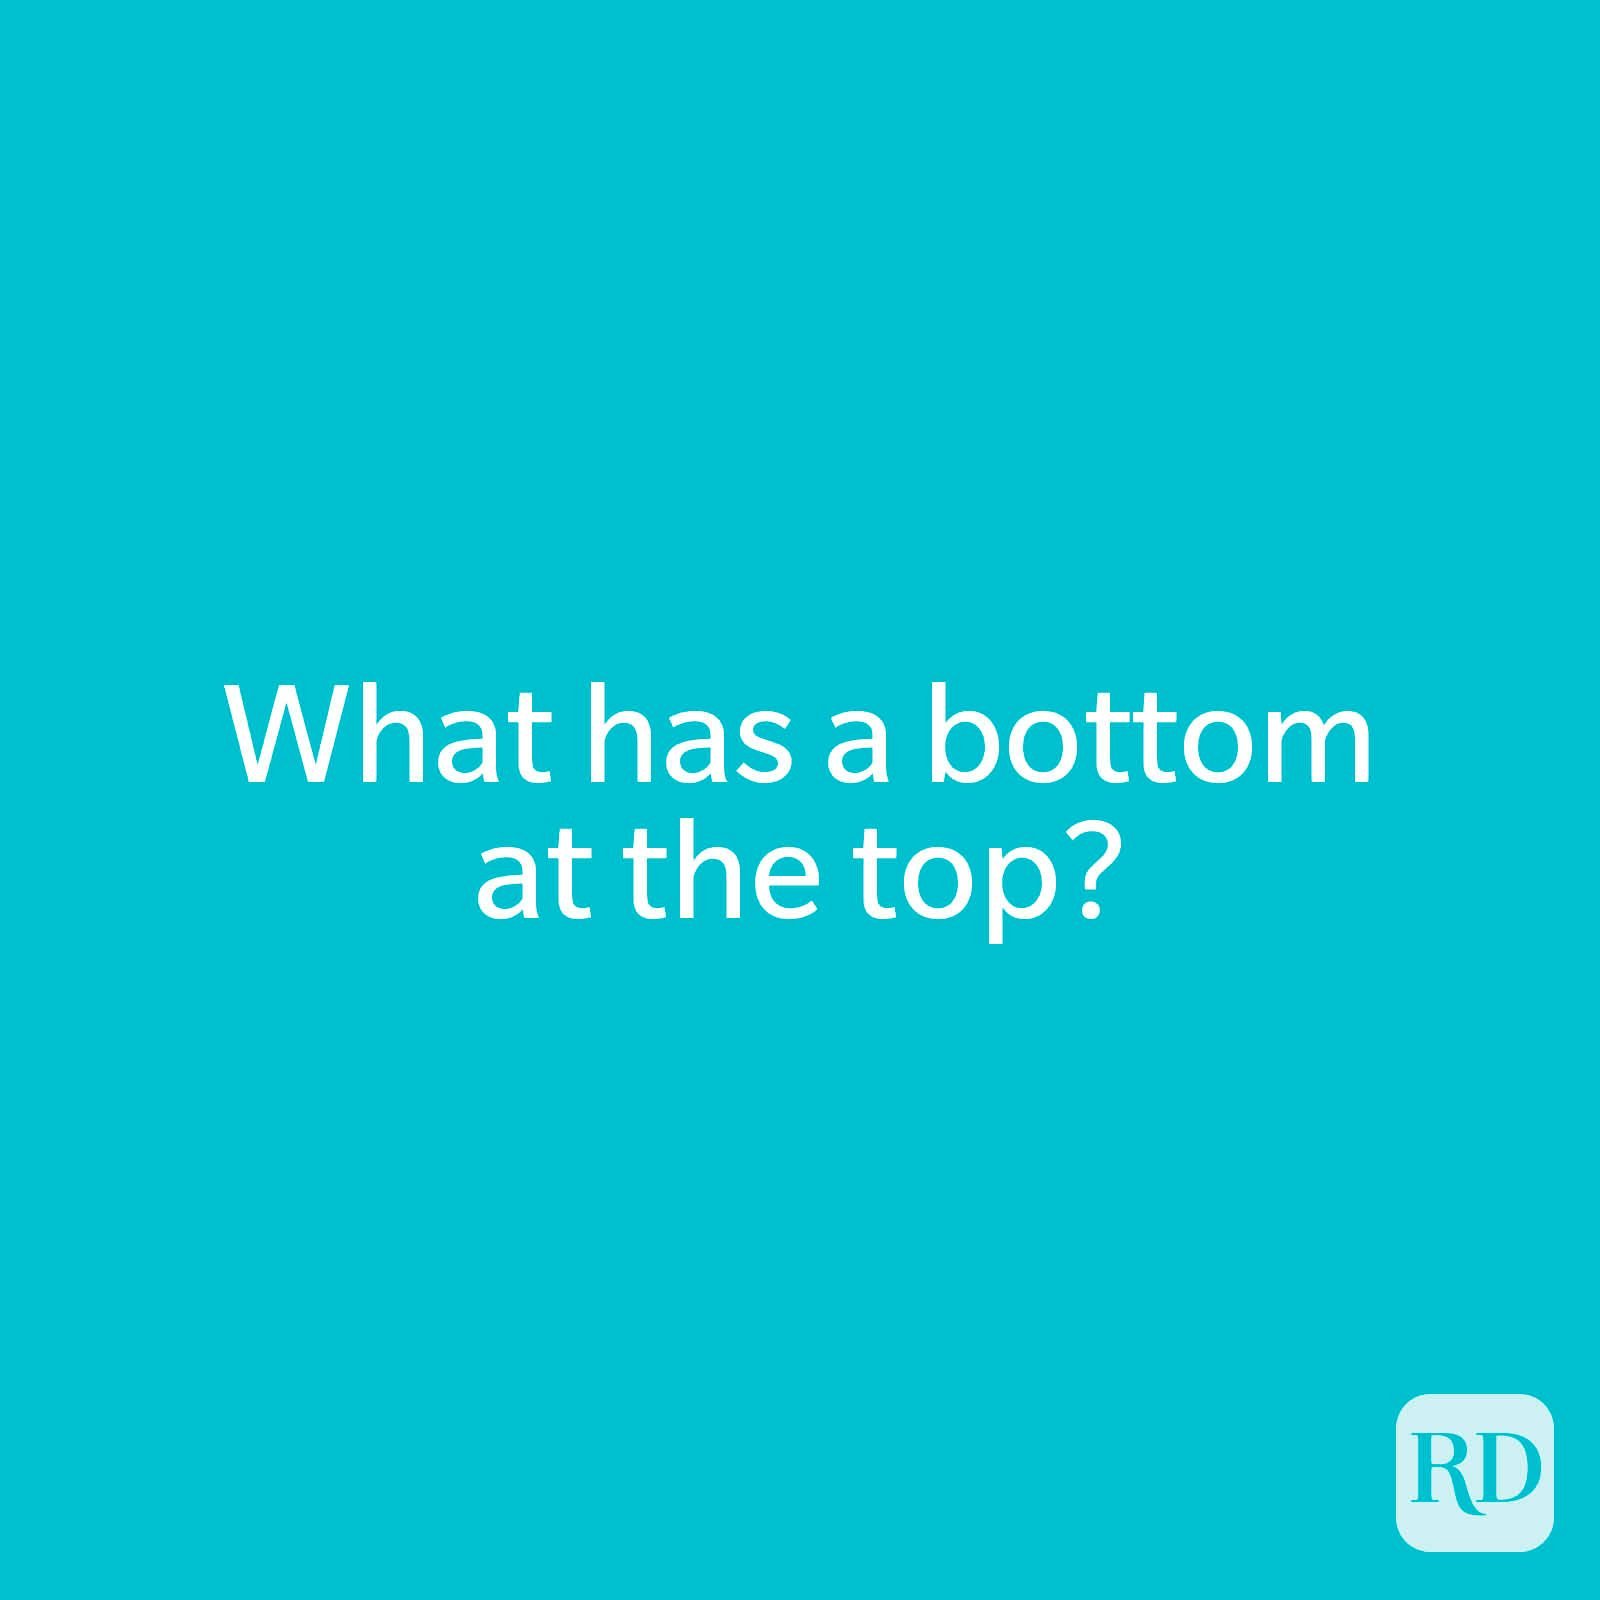 What has a bottom at the top?